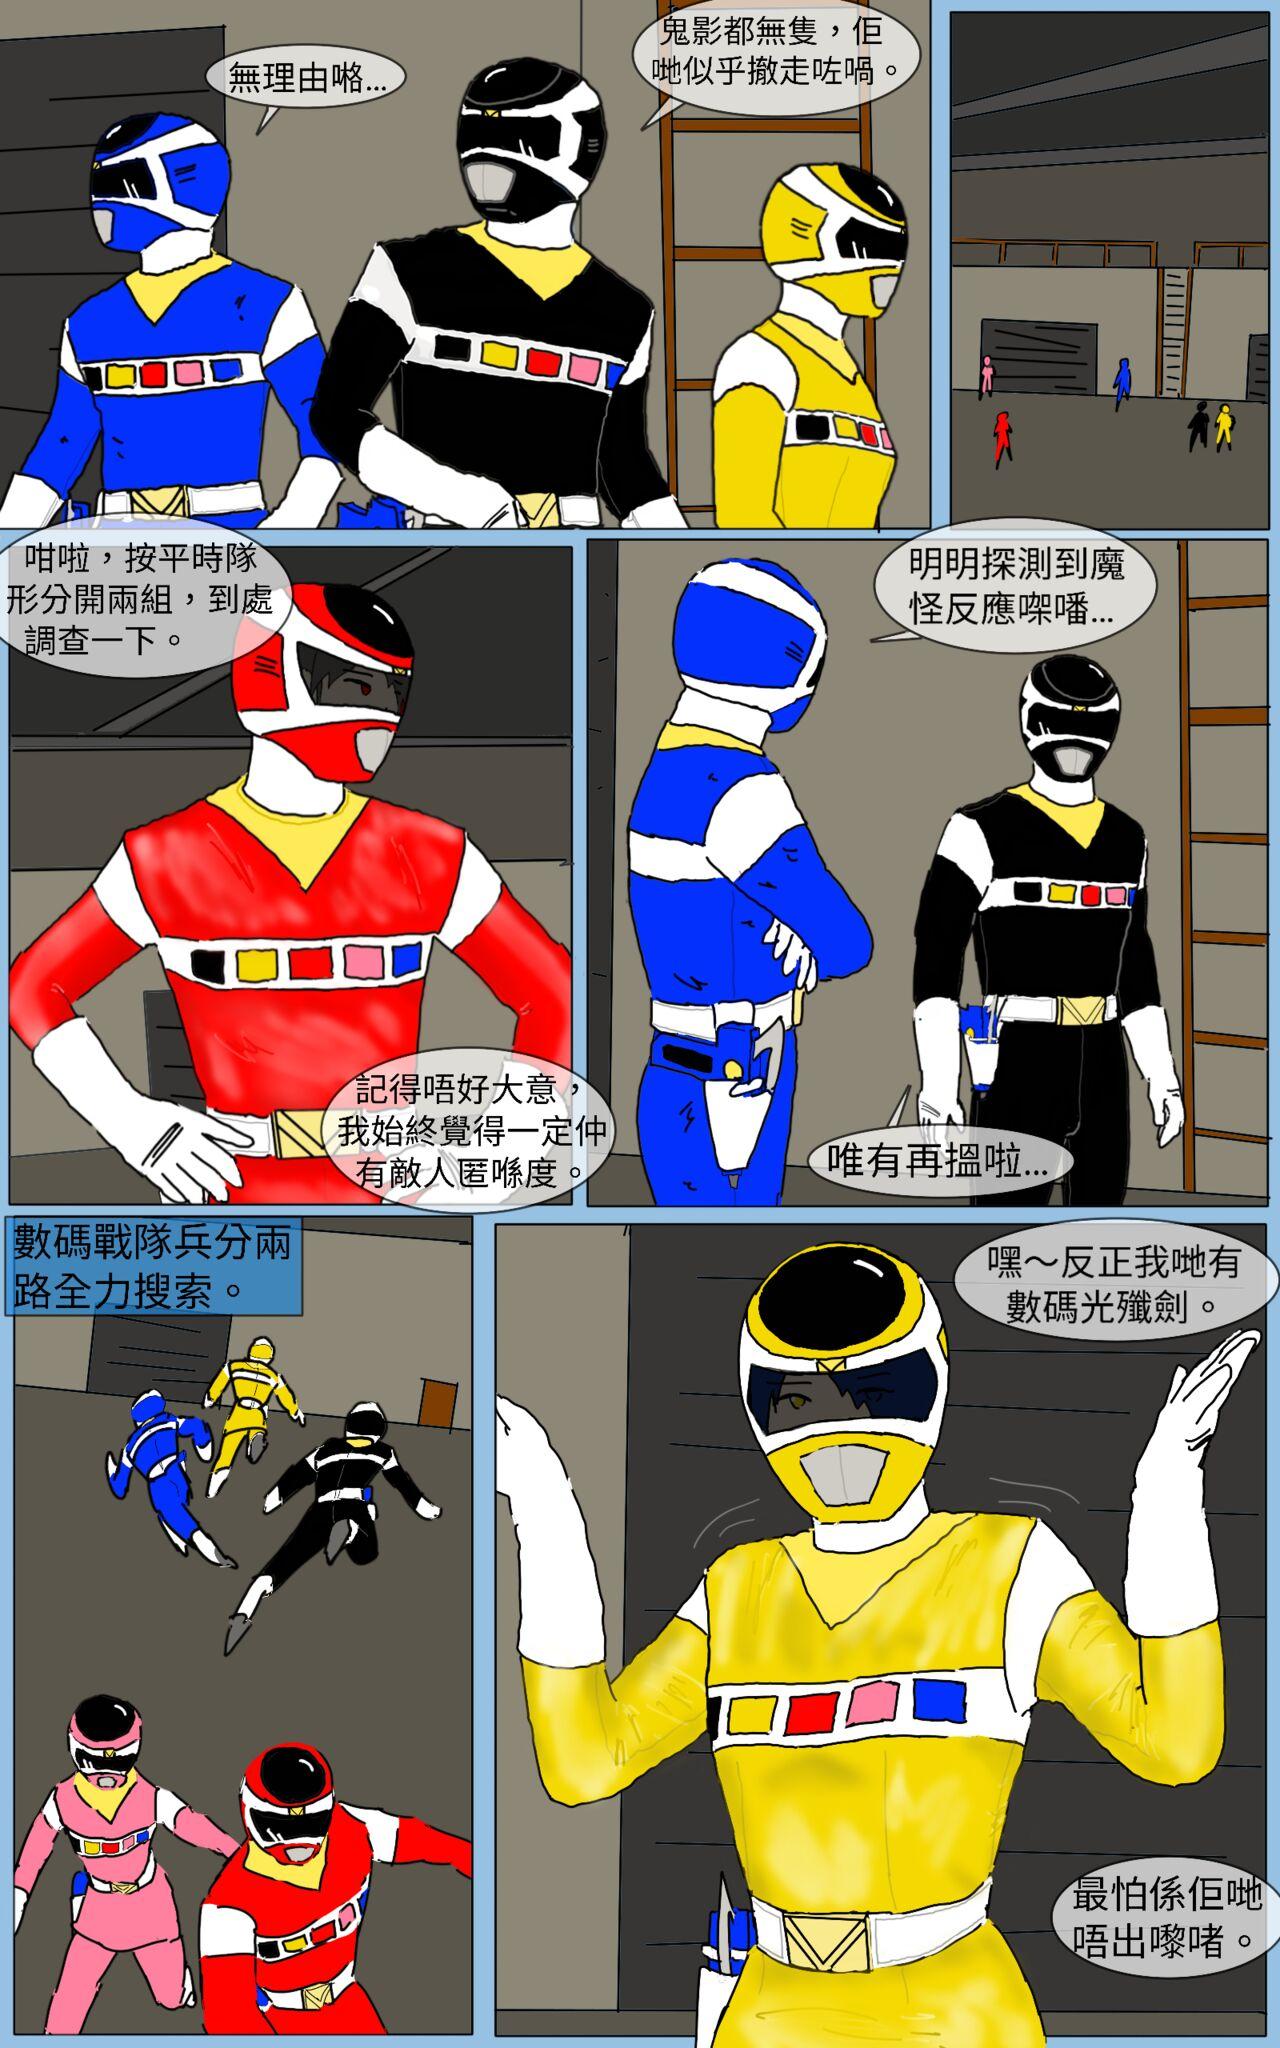 Real Orgasms Mission 15 - Super sentai Amateurs Gone Wild - Page 5